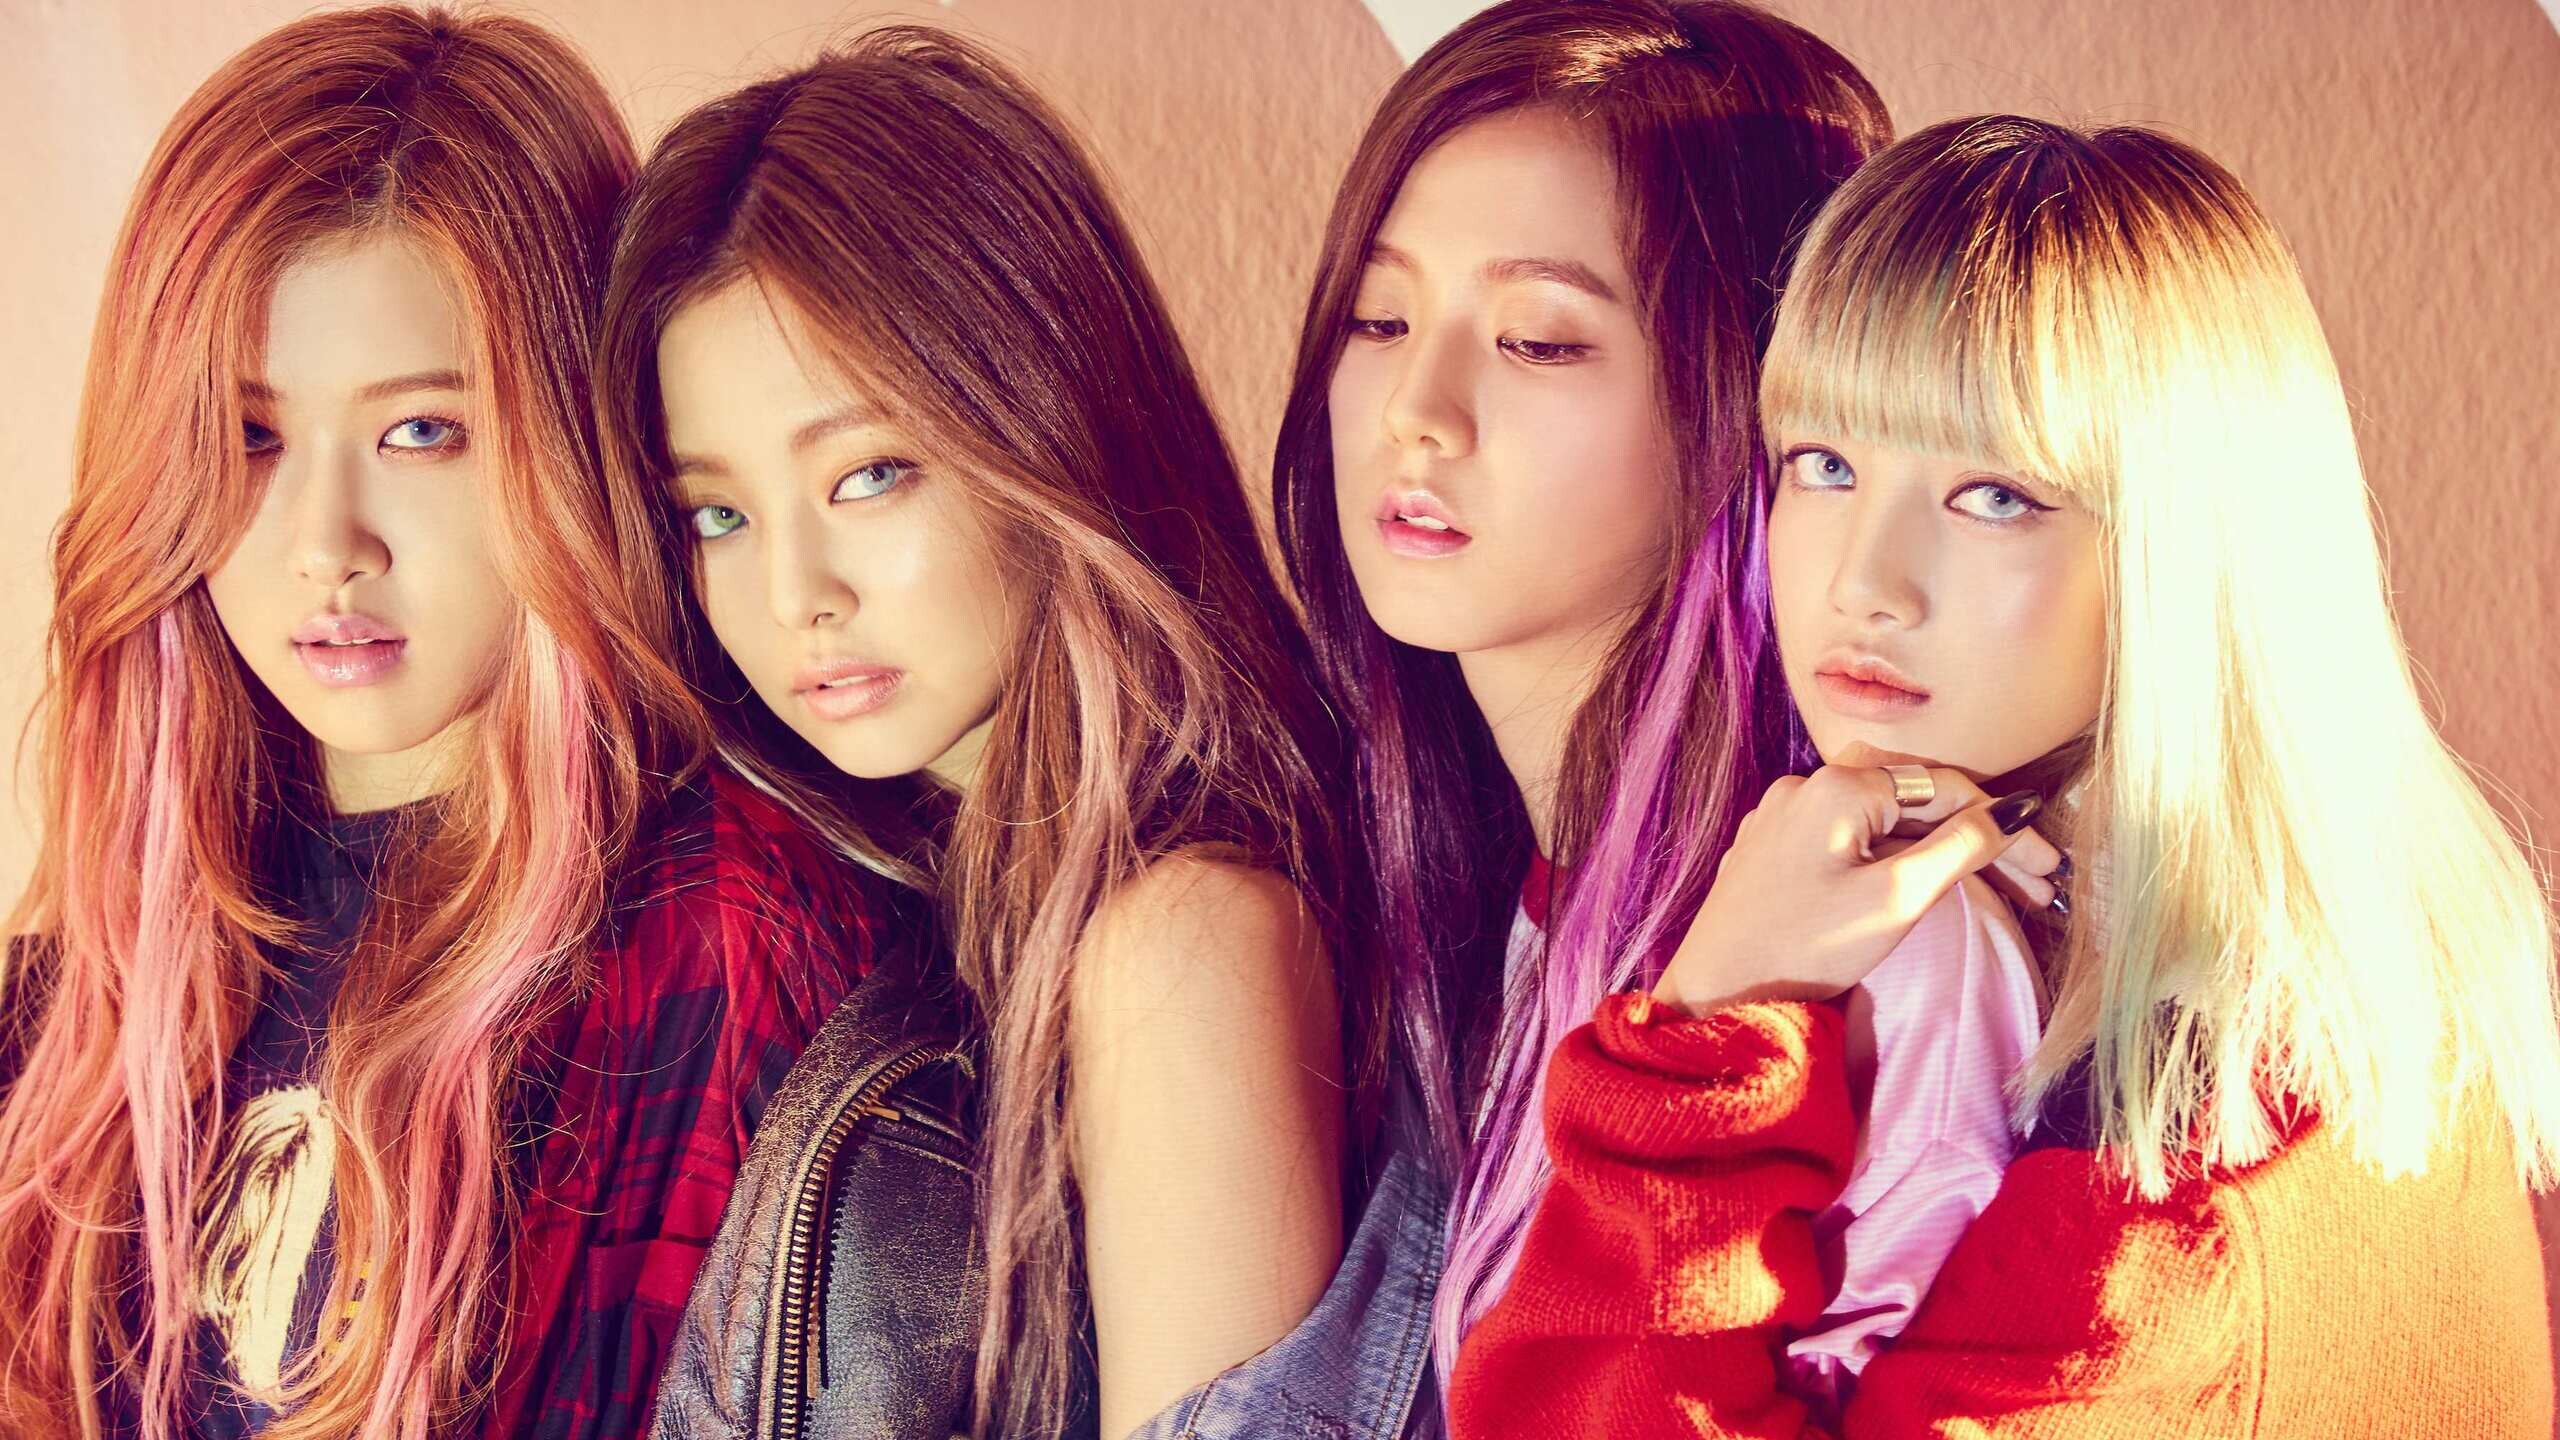 BLACKPINK: Born Pink (2022) is the best-selling album of all time by a Korean girl group. 2560x1440 HD Wallpaper.